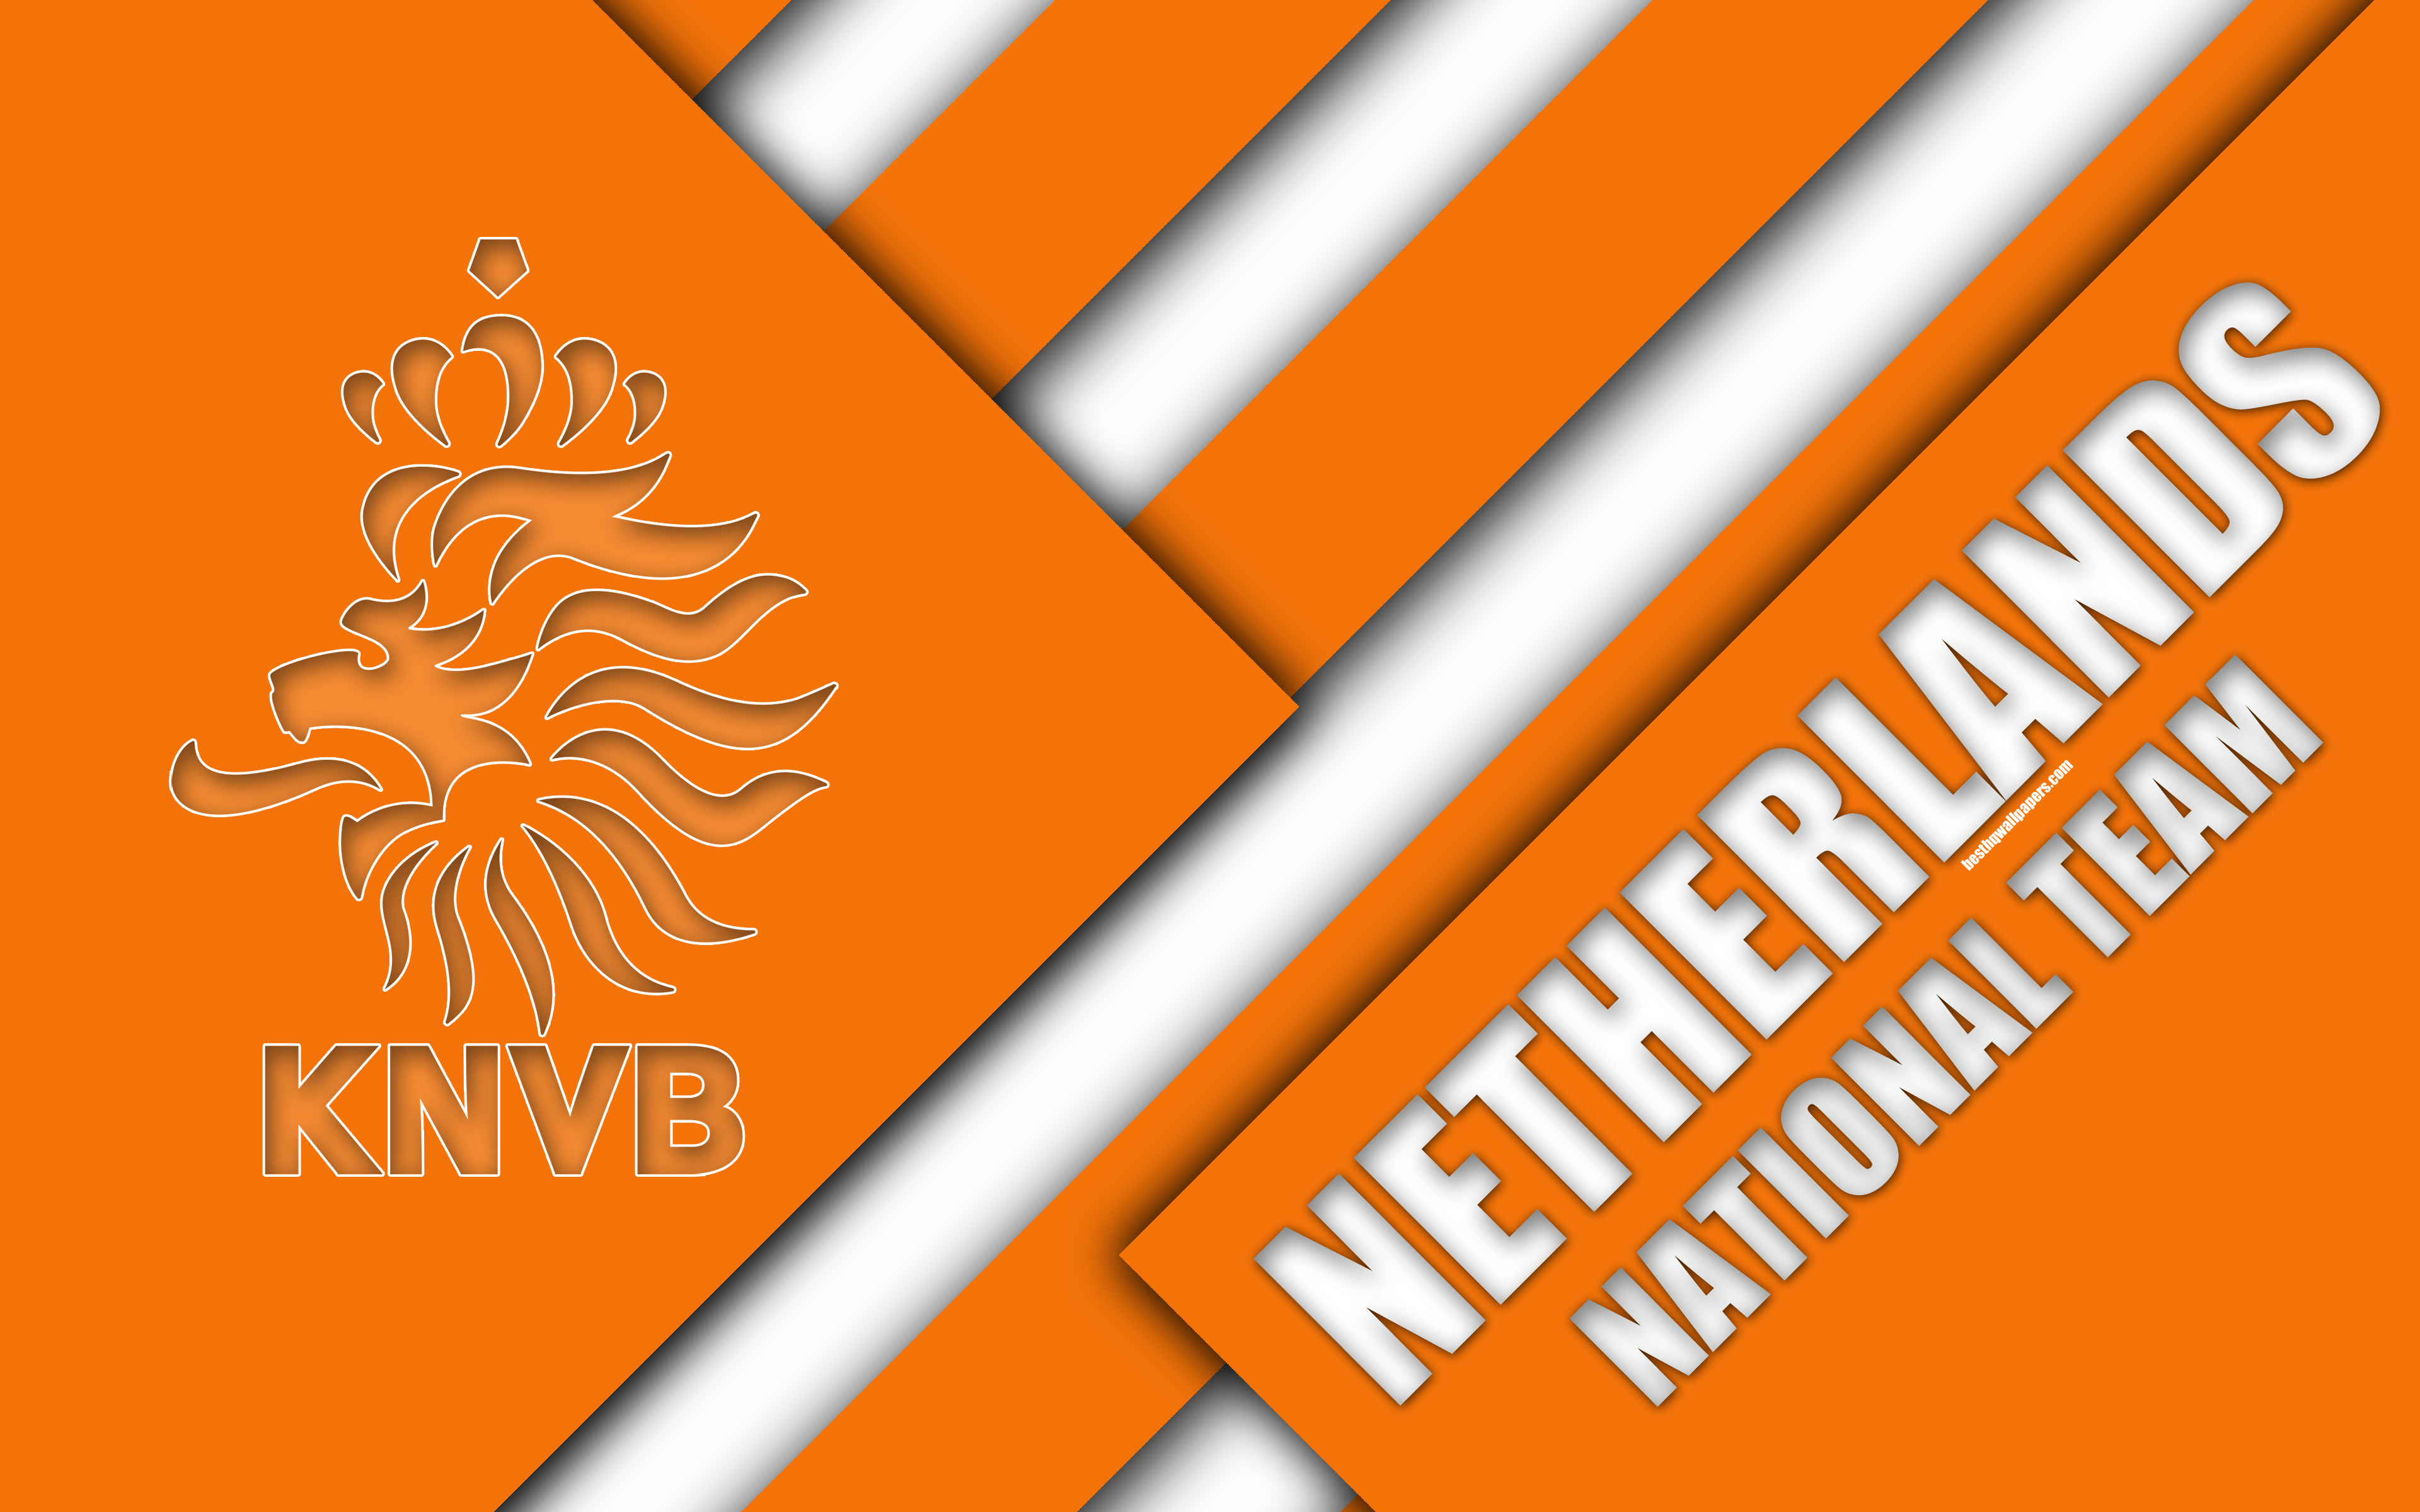 Download Holland KNVB Wallpaper by Deville83 - f5 - Free on ZEDGE™ now.  Browse millions of popular de Wallpapers and Ringt…